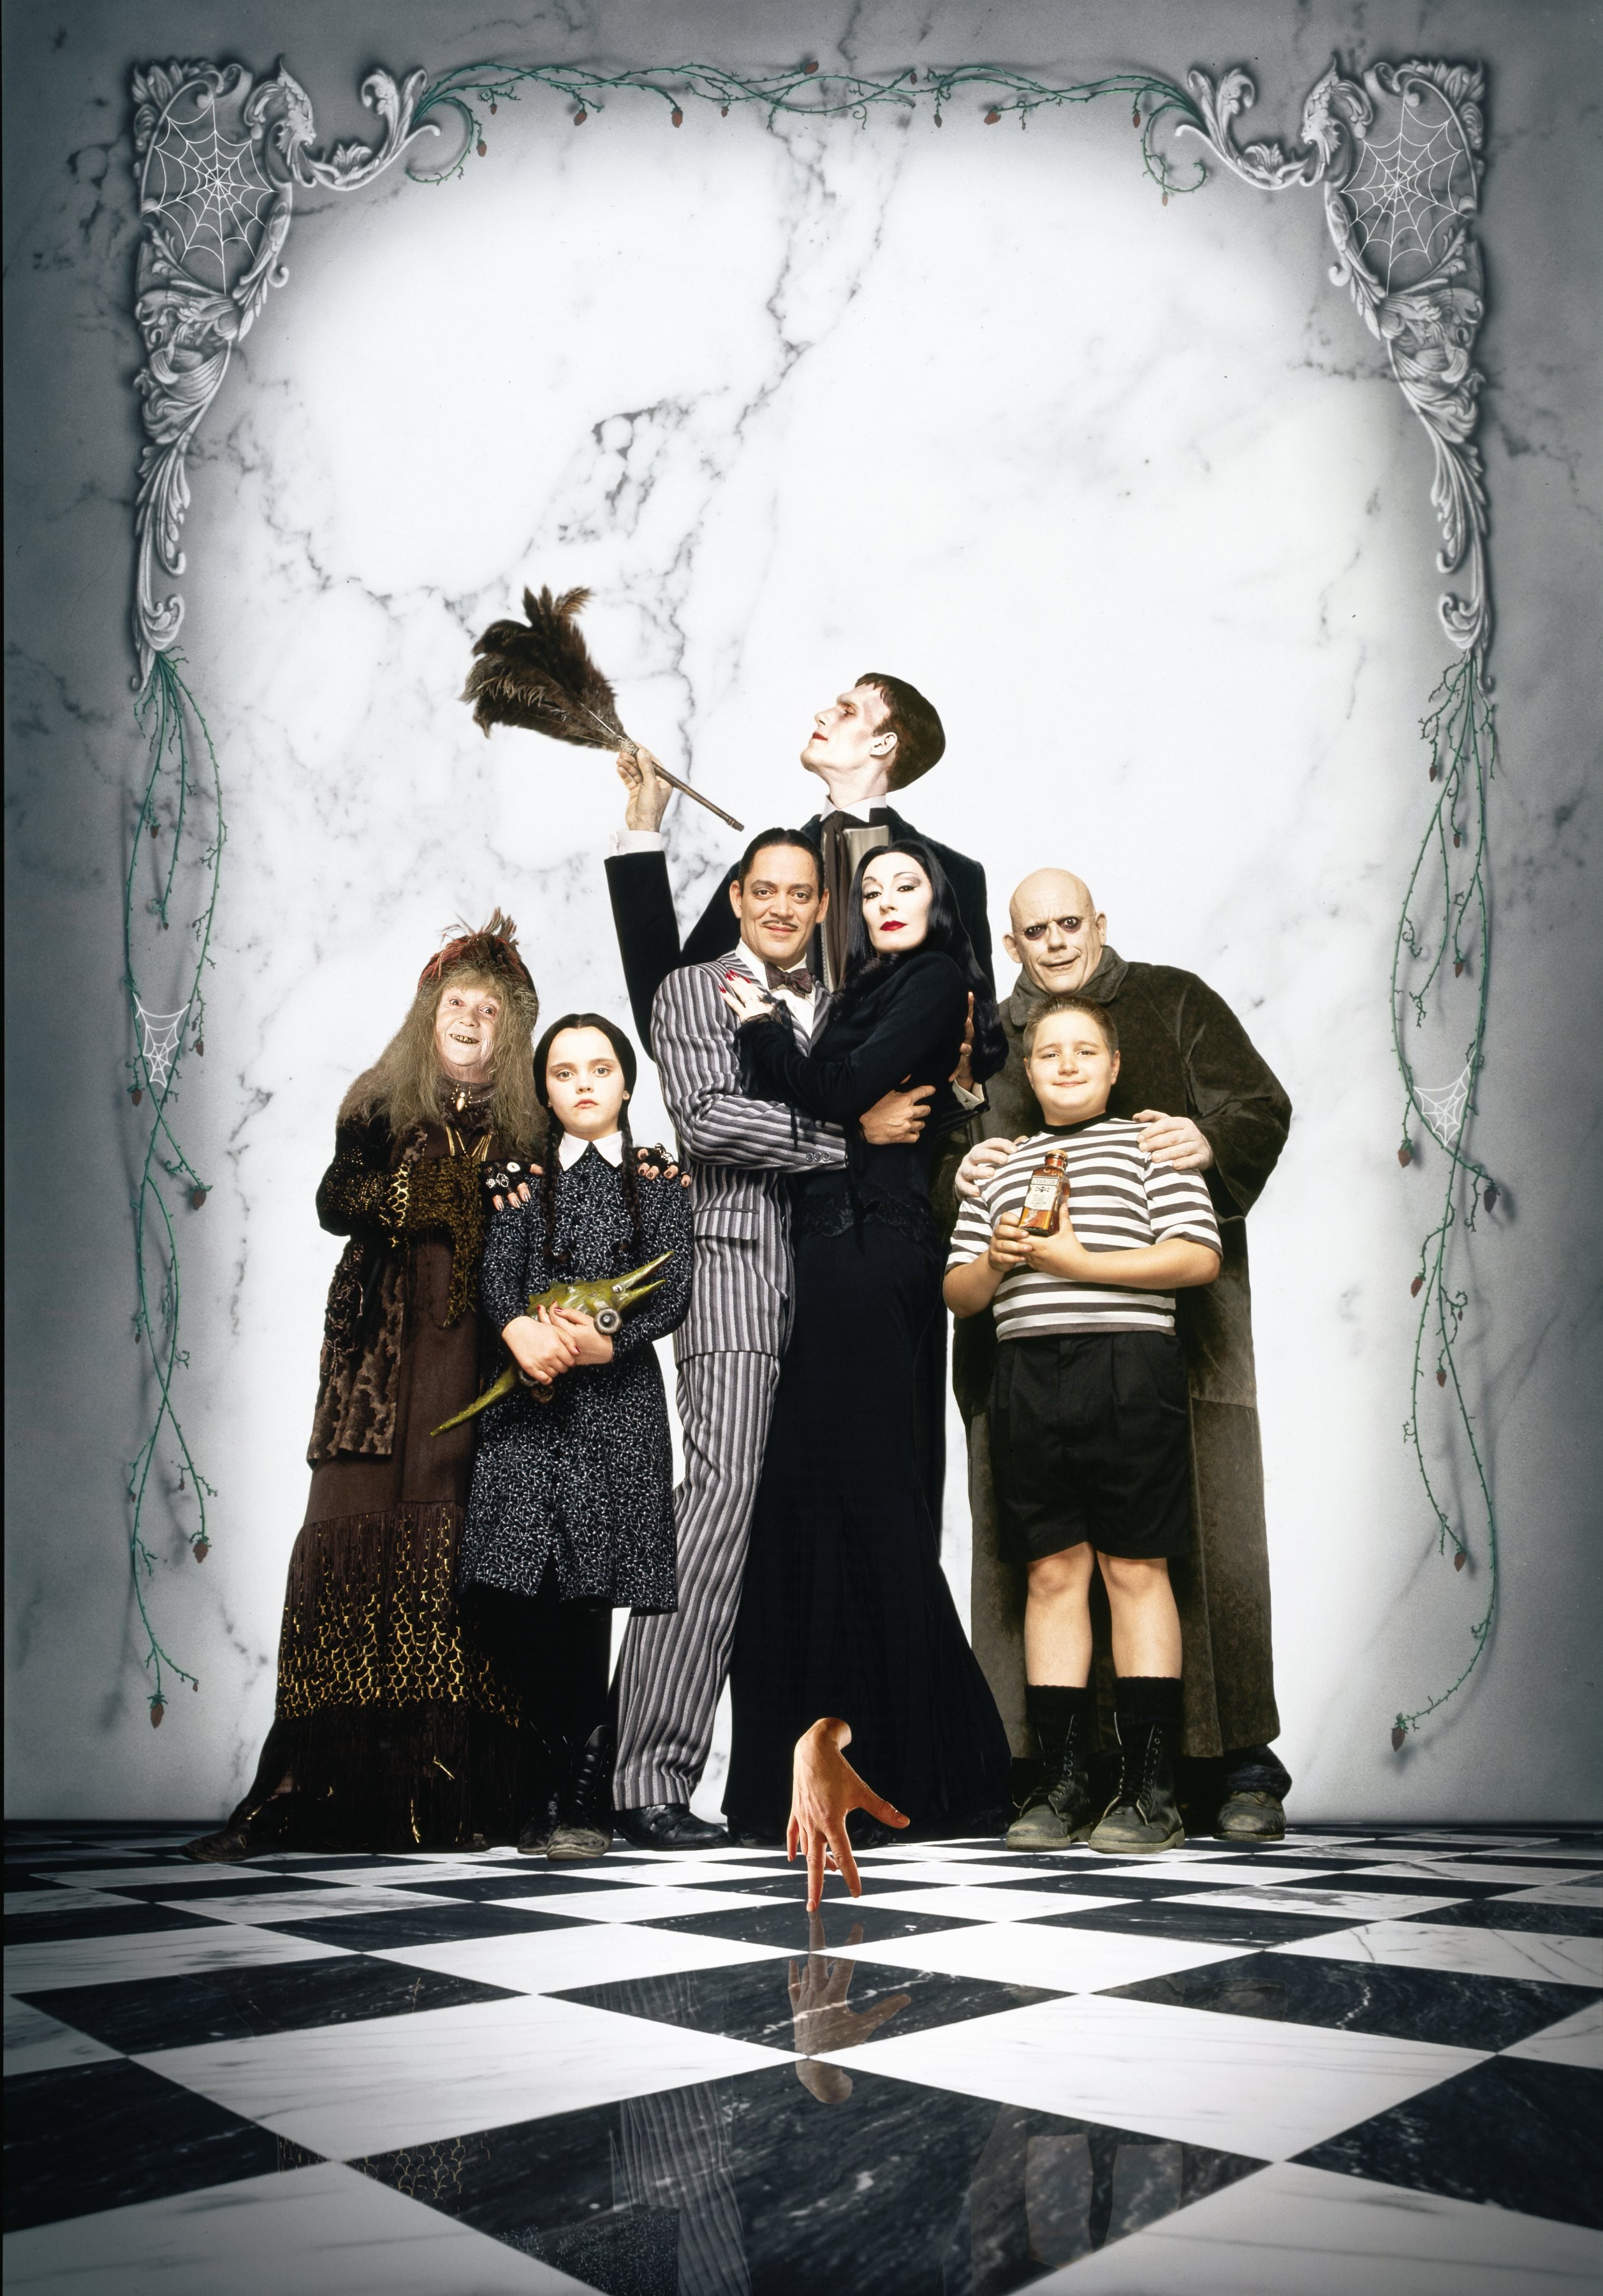 People 2514x3600 family The Addams Family hands movies Wednesday Addams Gomez Morticia Addams Uncle Fester Lurch Thing movie poster